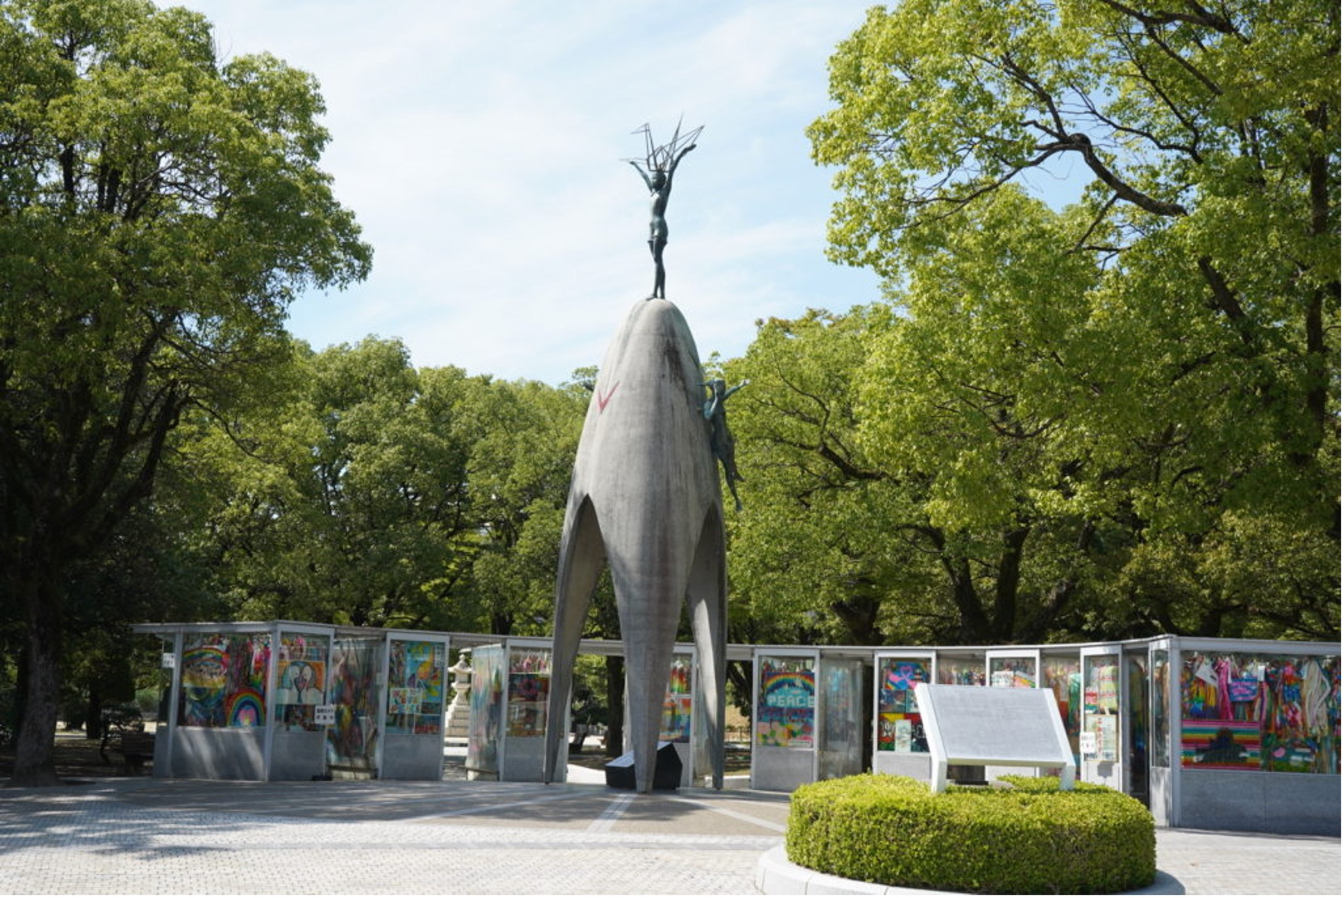 Children’s Peace Monument at Peace Memorial Park in Hiroshima. After Sadako's death, her classmates raised funds to create a monument to comfort the spirits of all the children who are victims of the atomic bombing.&nbsp; &nbsp; &nbsp;Source: International Center Hiroshima website